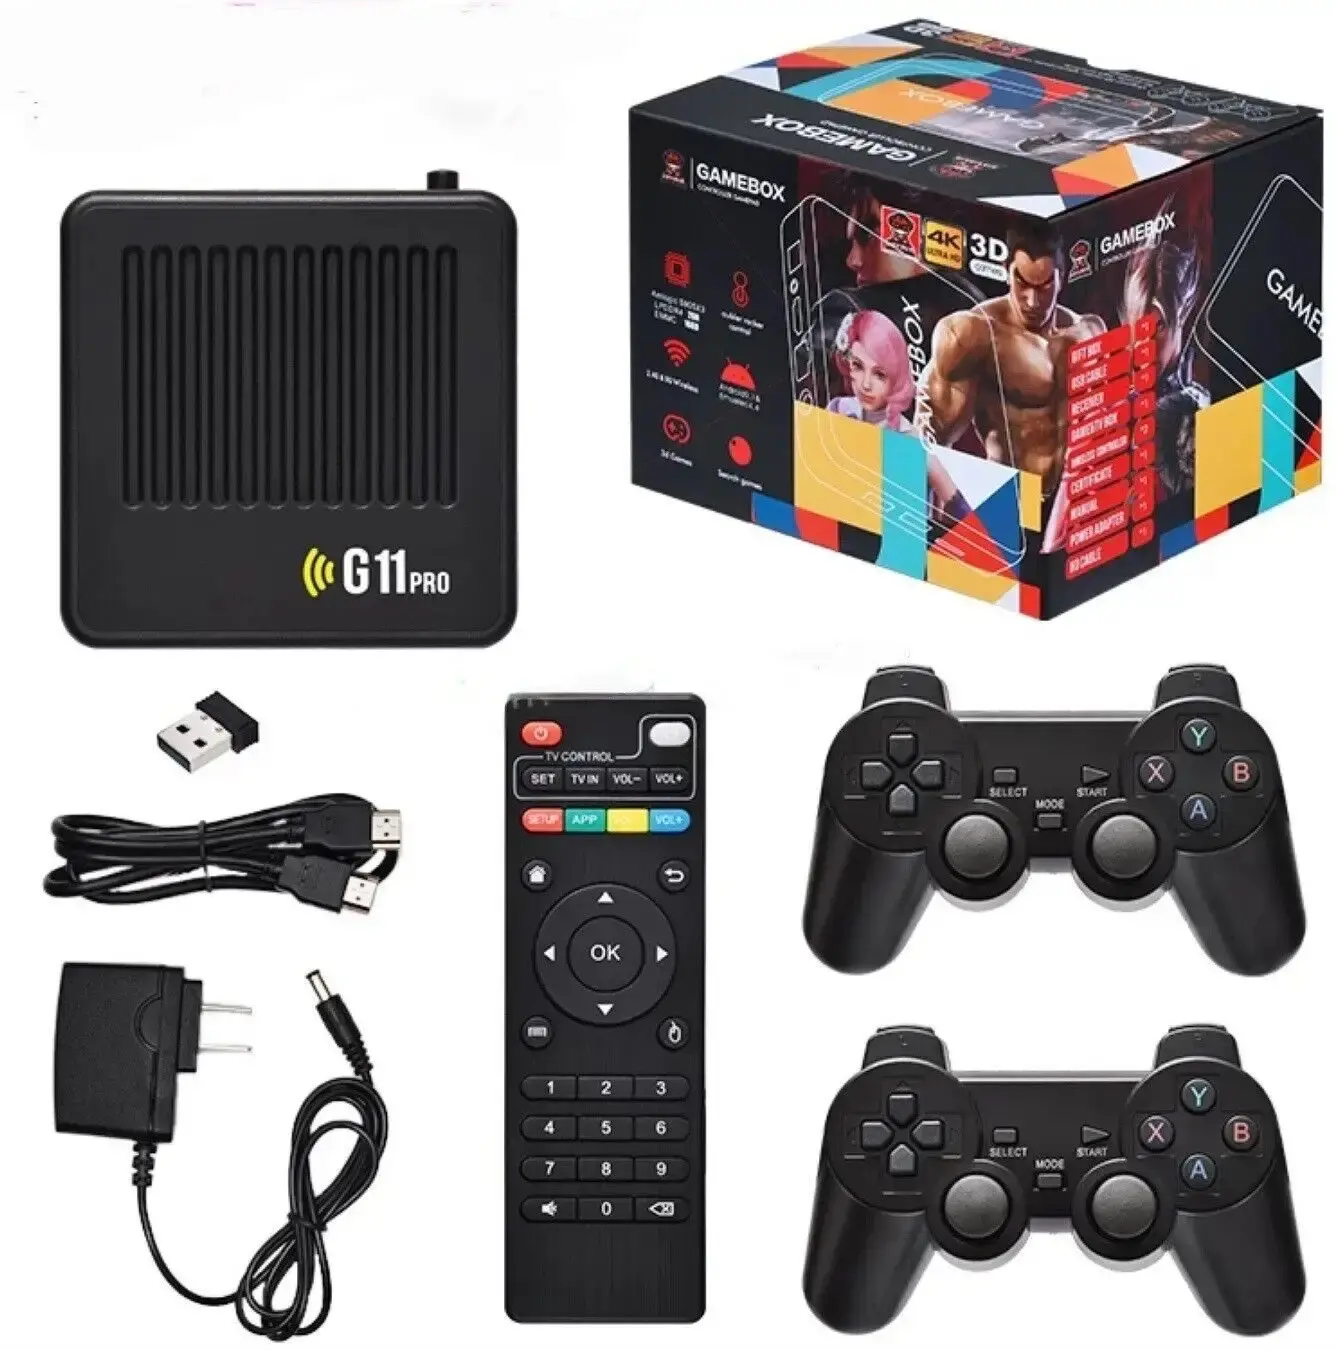 G11 Pro Video Game Box 40000+ Games 4k 128GB Family Retro Classic game Console Support TV Box For PSP/N64/DC